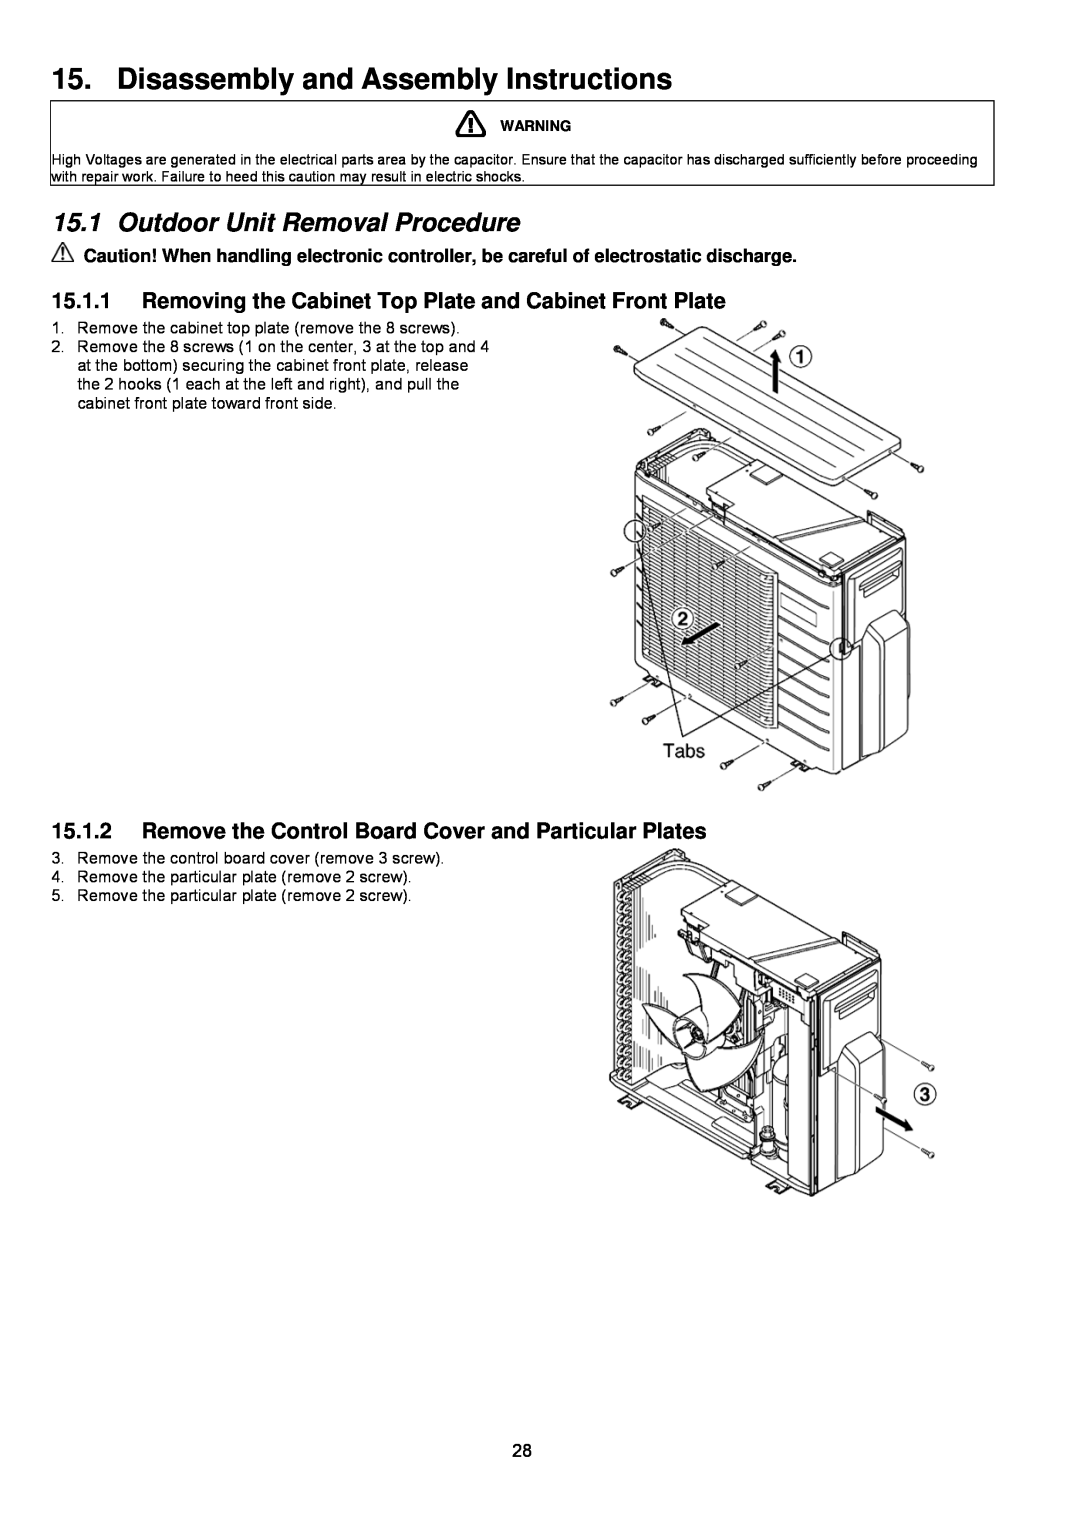 Panasonic CU-2S18NBU-1 service manual Disassembly and Assembly Instructions, Outdoor Unit Removal Procedure 